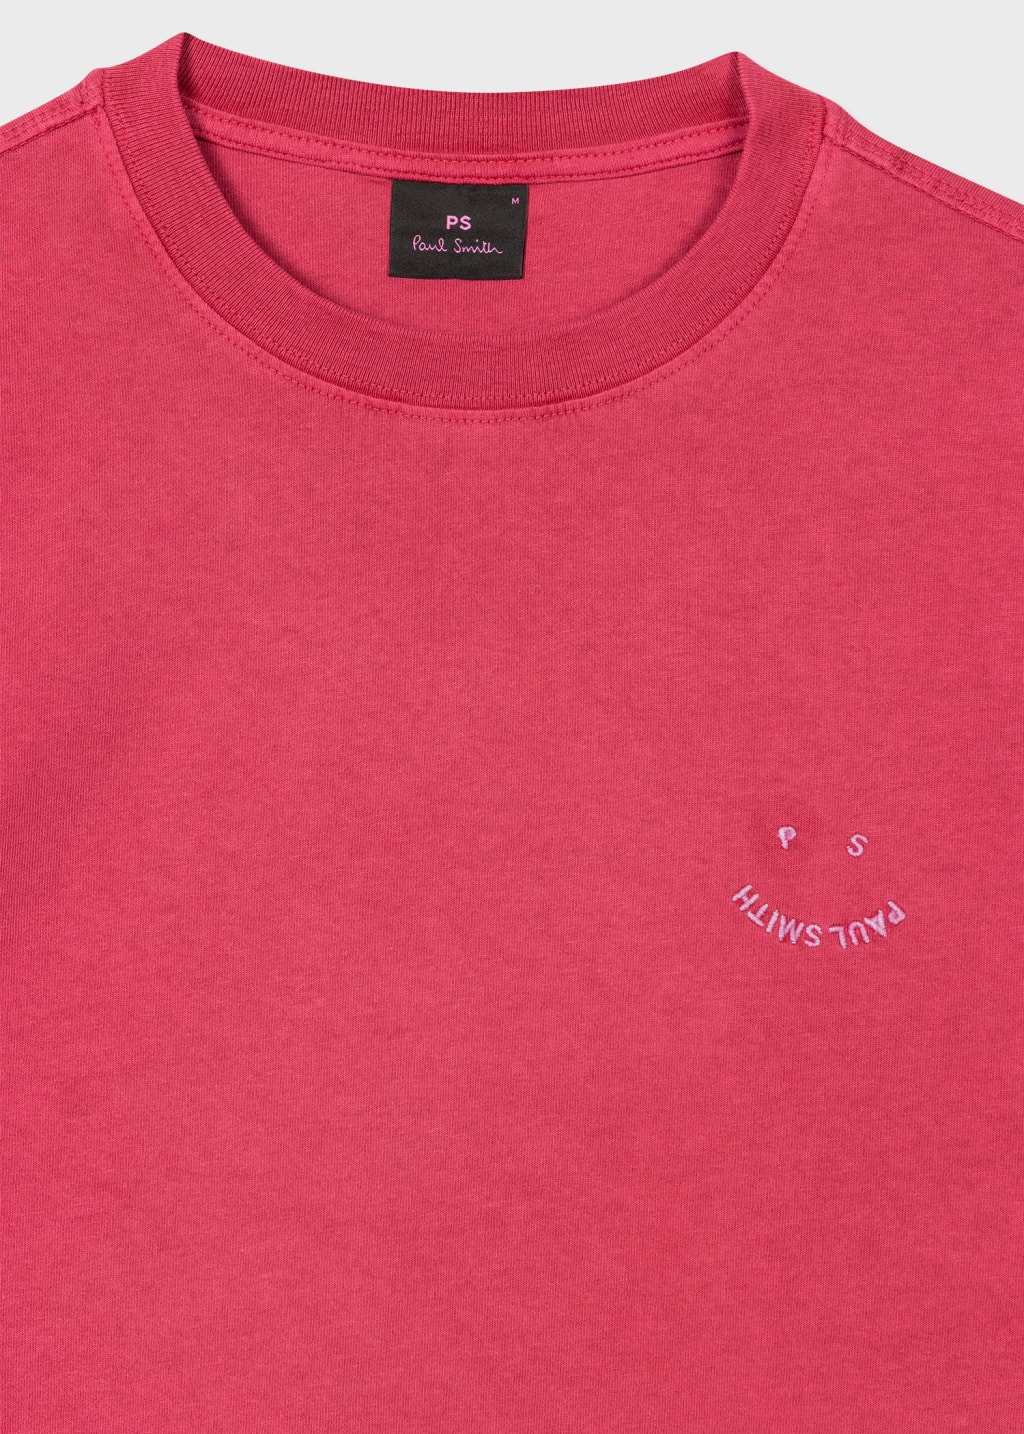 Detail View - Washed Red Cotton 'Happy' T-Shirt Paul Smith